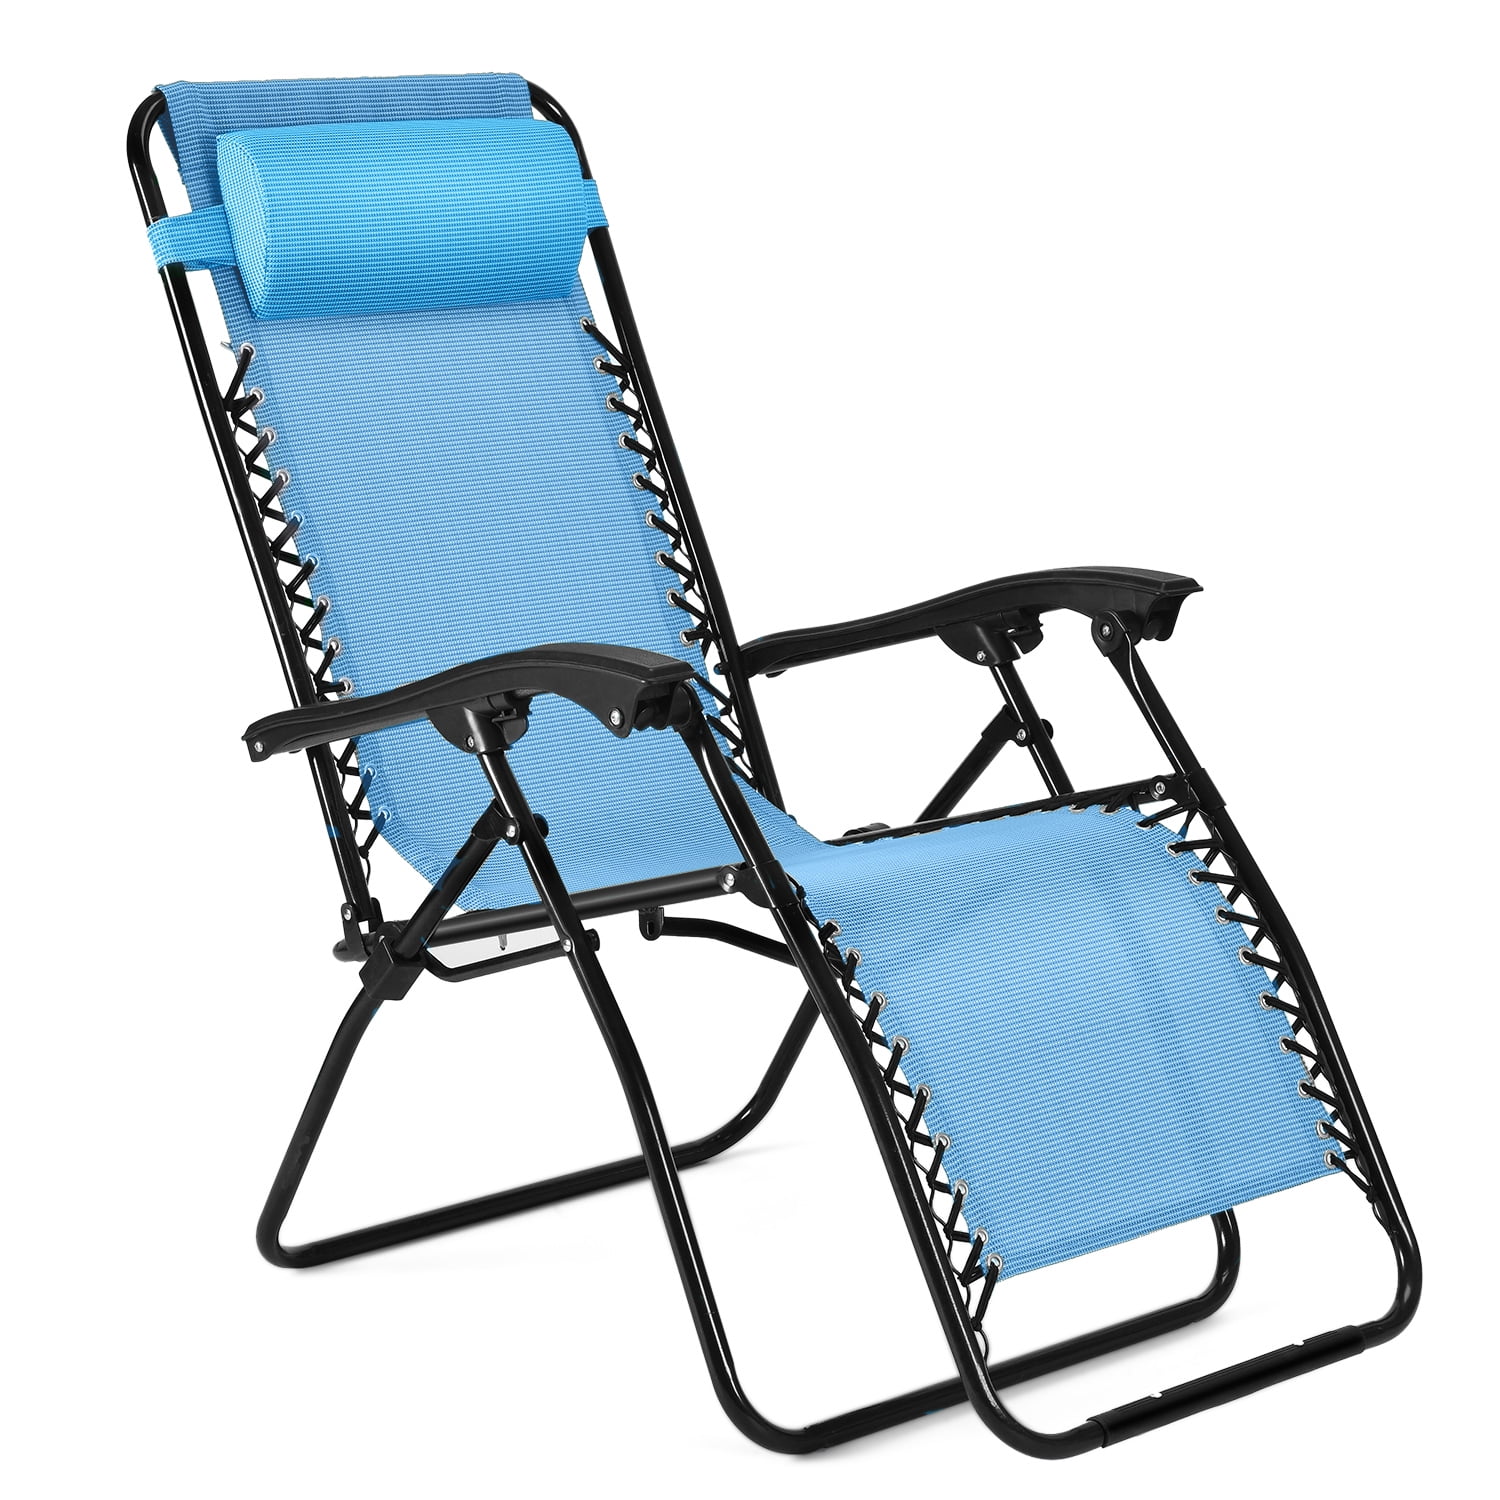 Zero Gravity Chair - Anti Gravity Outdoor Lounge Patio Folding Reclining  Chair and Textilene Seat with Footrest & Adjustable Pillow For Yard, Beach,  